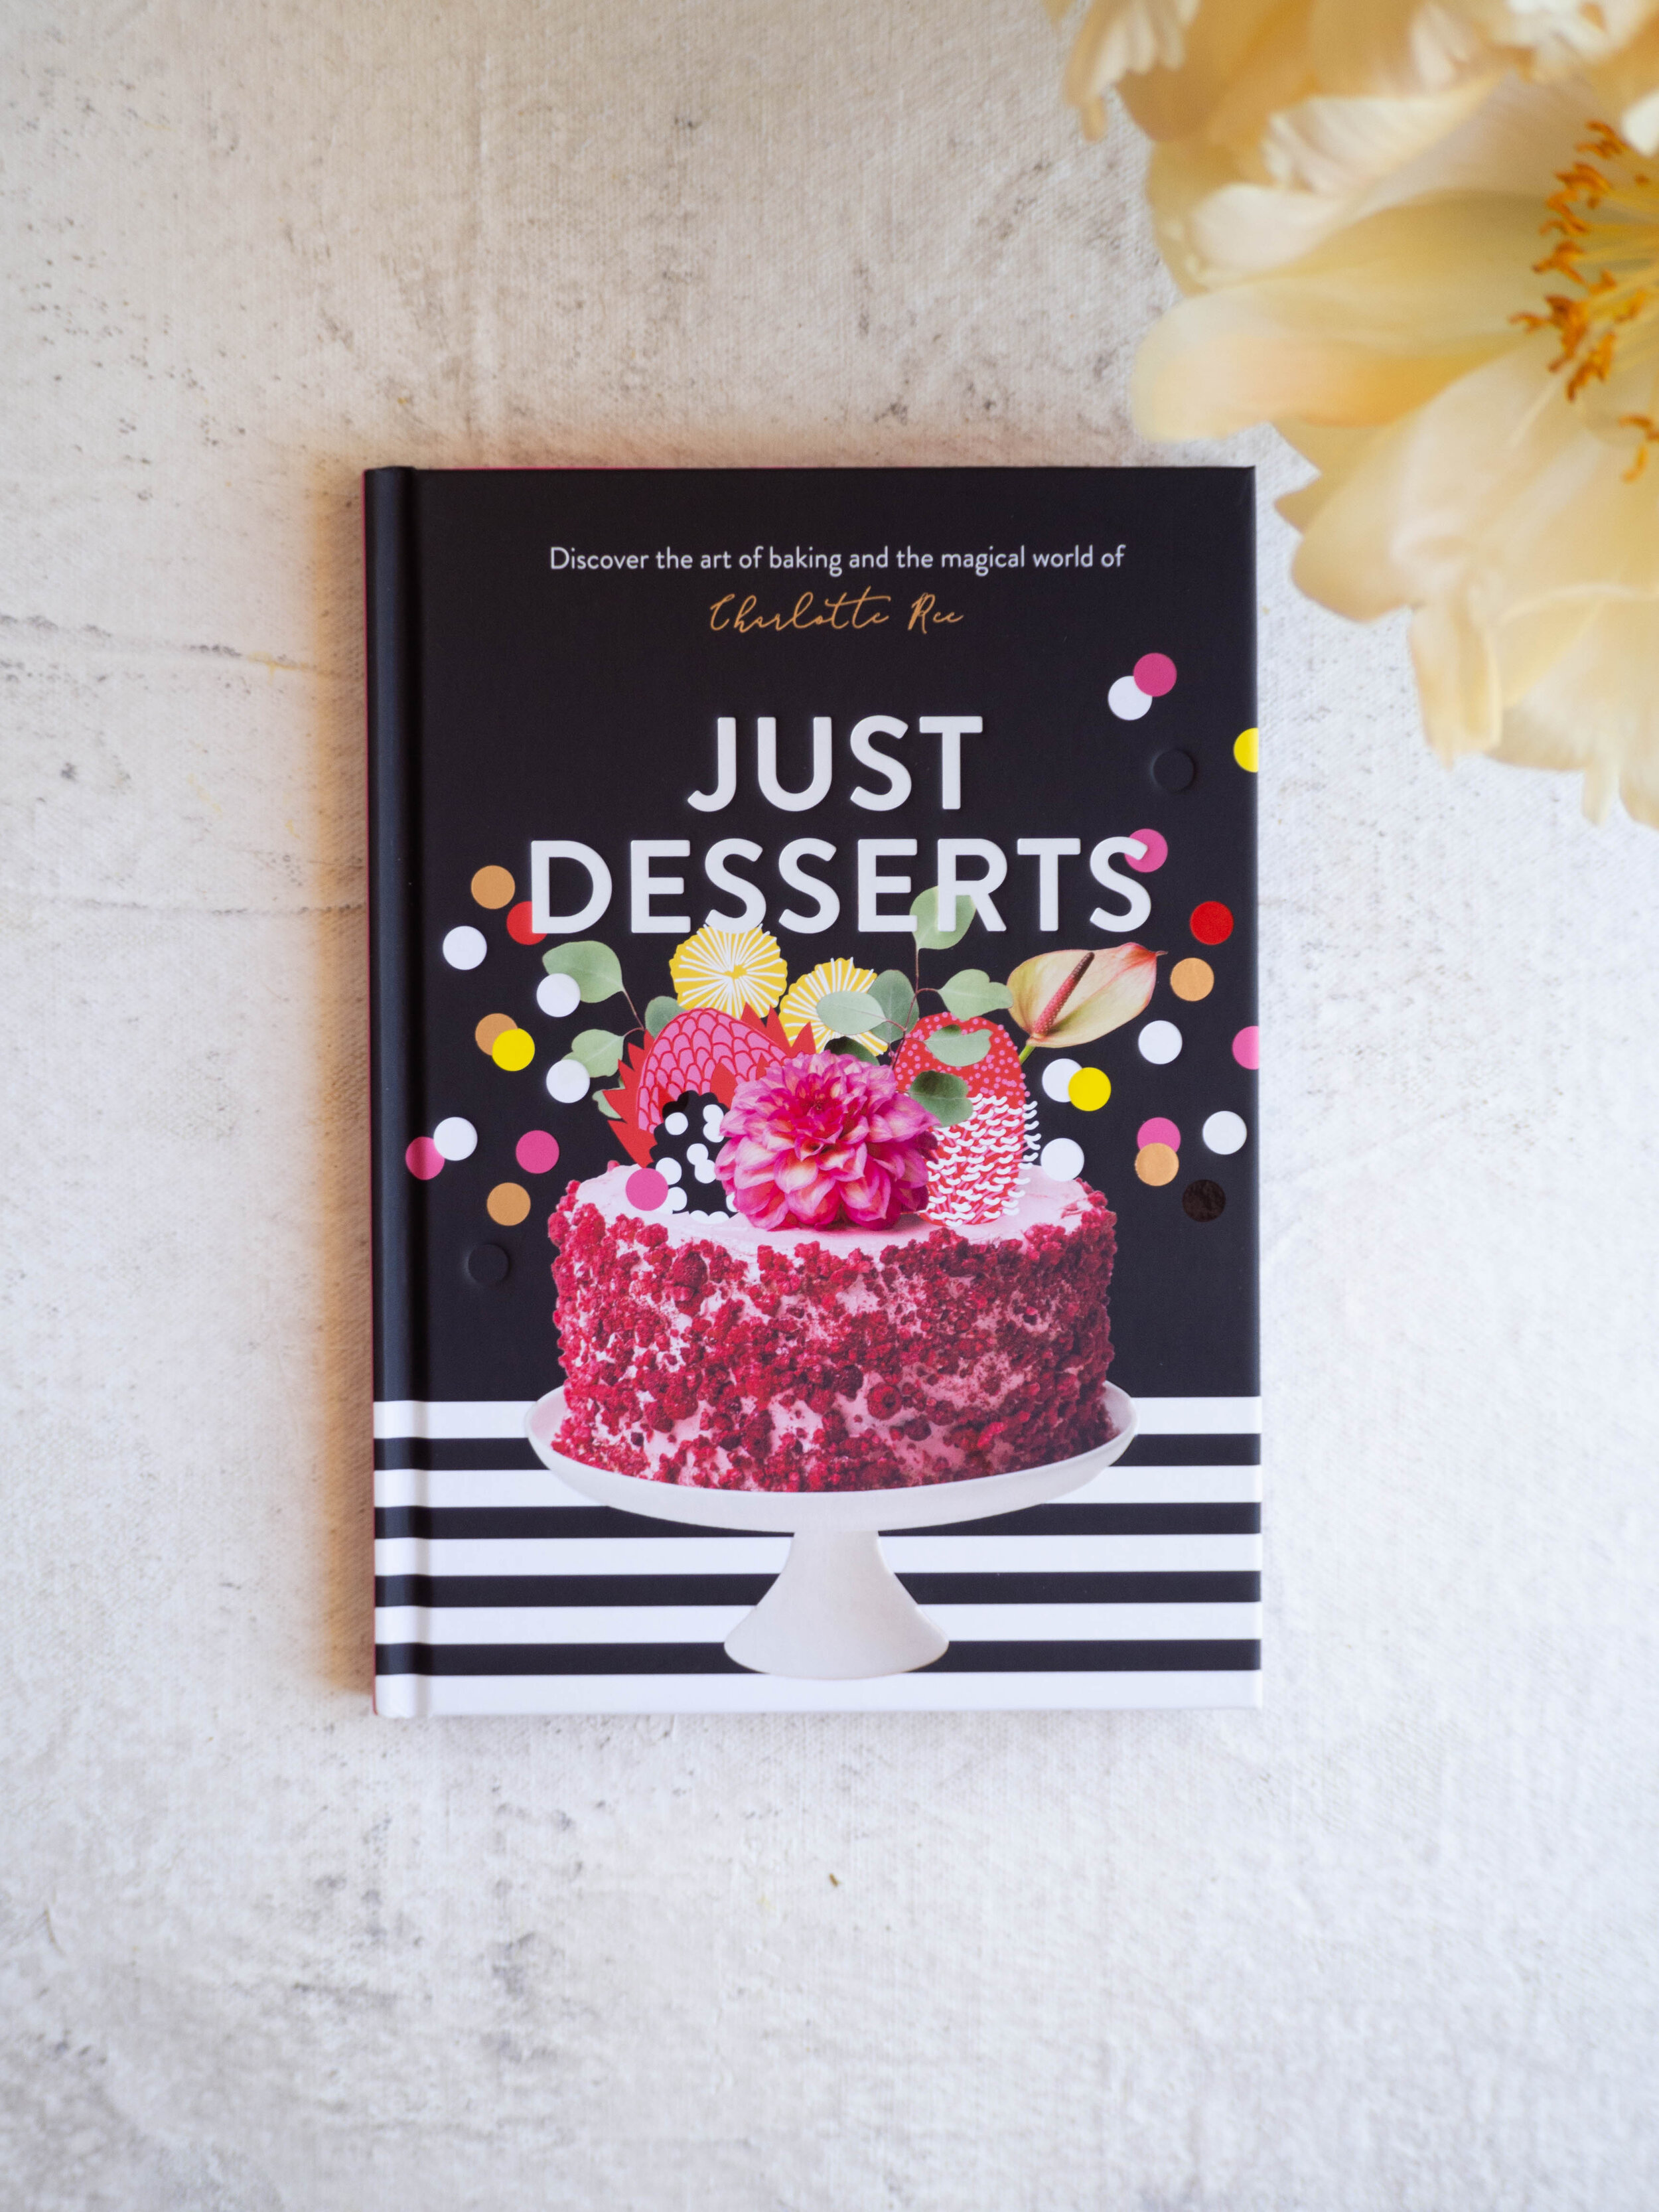 Just Desserts by Charlotte Ree